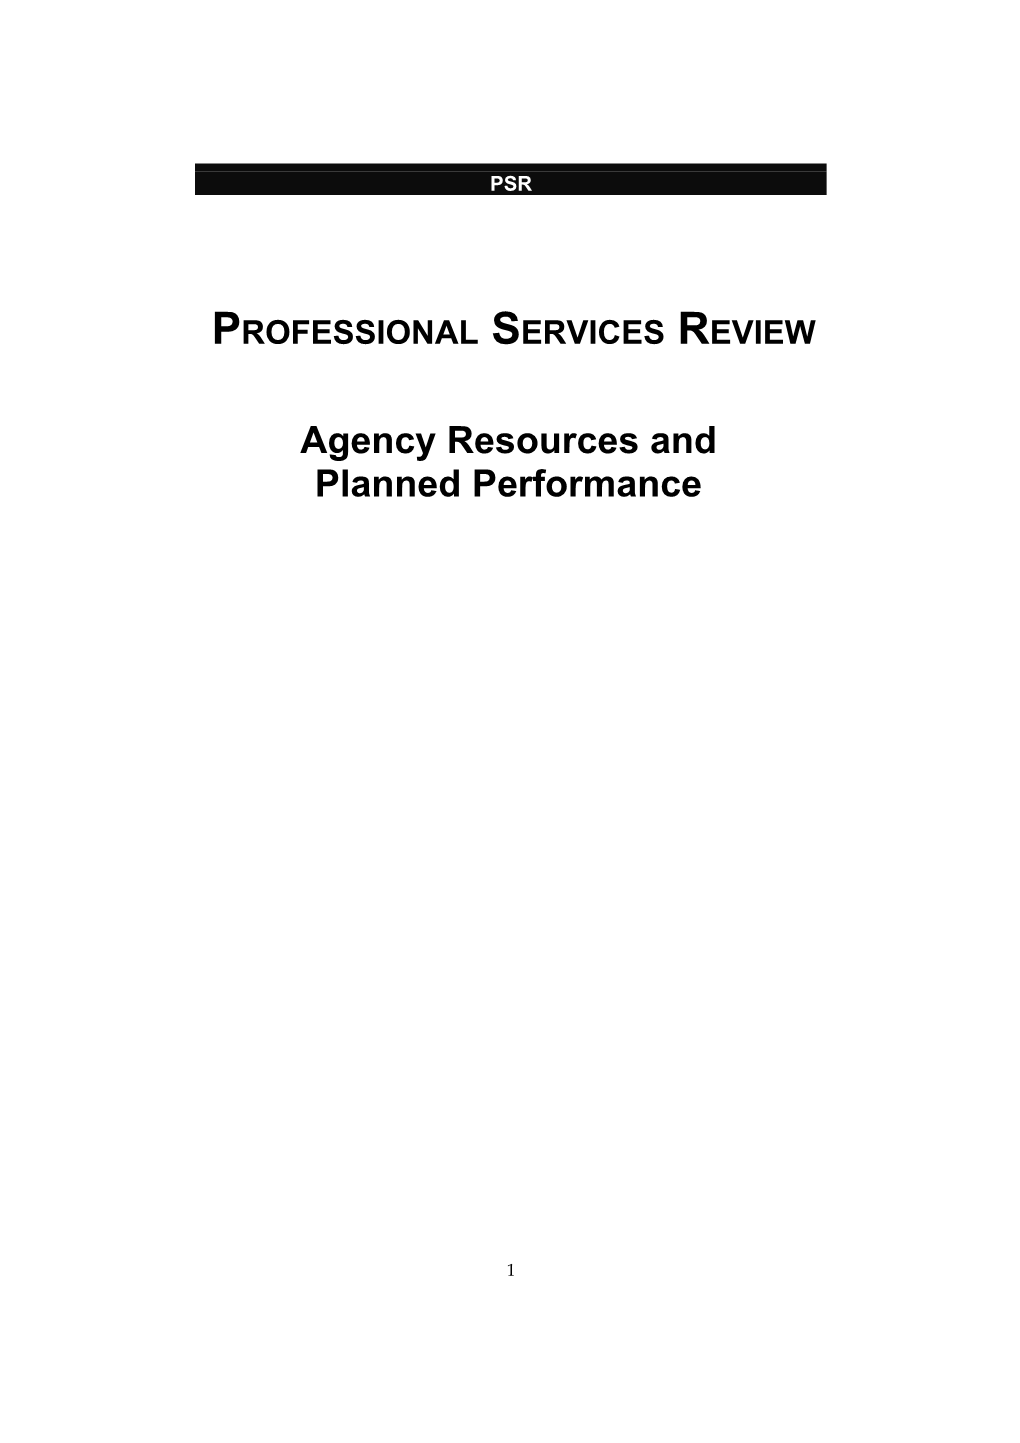 PROFESSIONAL SERVICES REVIEW Agency Resources and Planned Performance